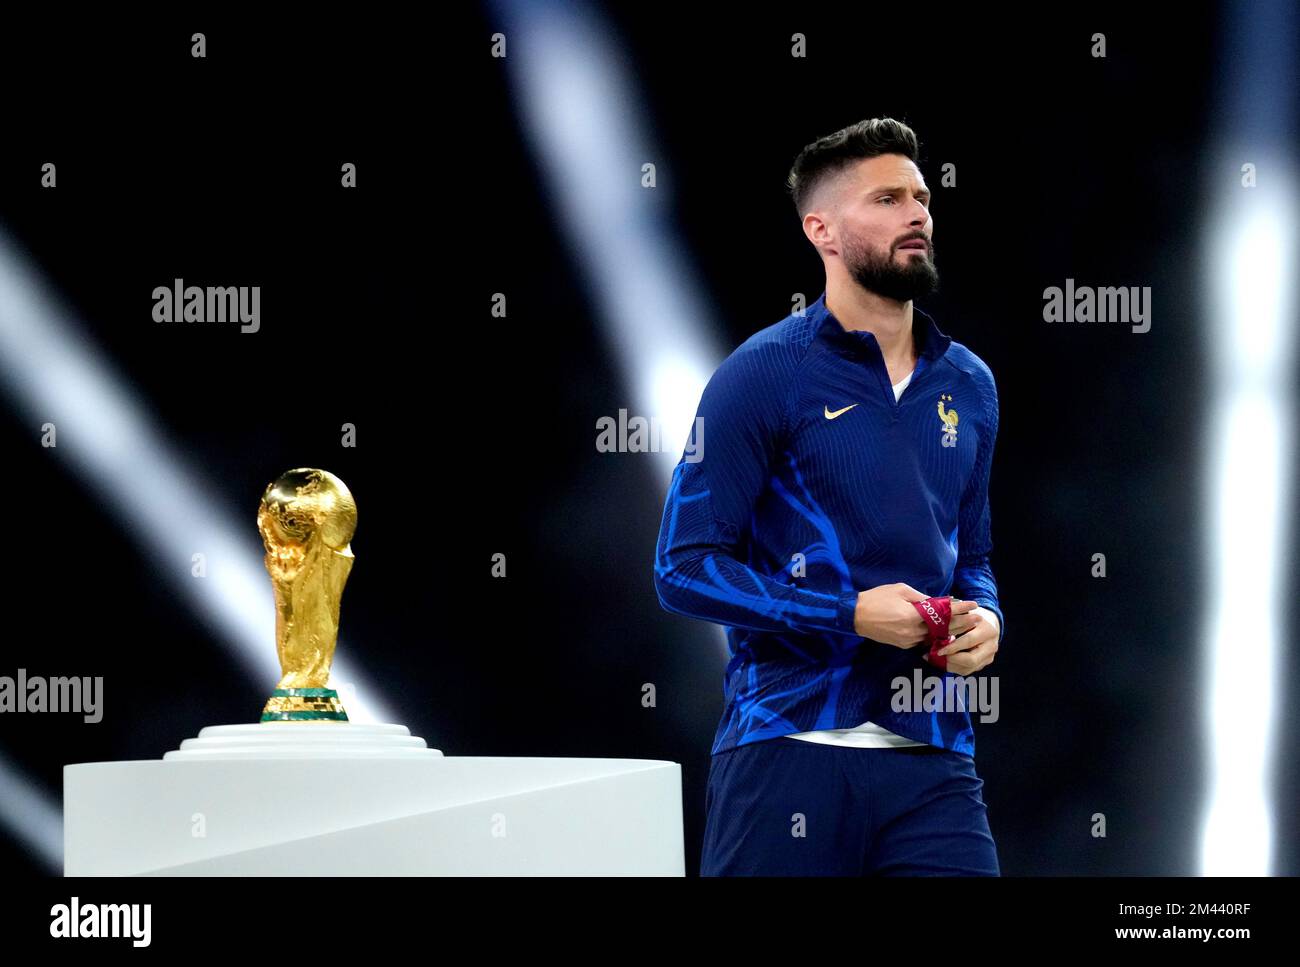 France's Olivier Giroud walks past the FIFA World Cup trophy after being presented with his second place medal following defeat in the FIFA World Cup final at Lusail Stadium, Qatar. Picture date: Sunday December 18, 2022. Stock Photo